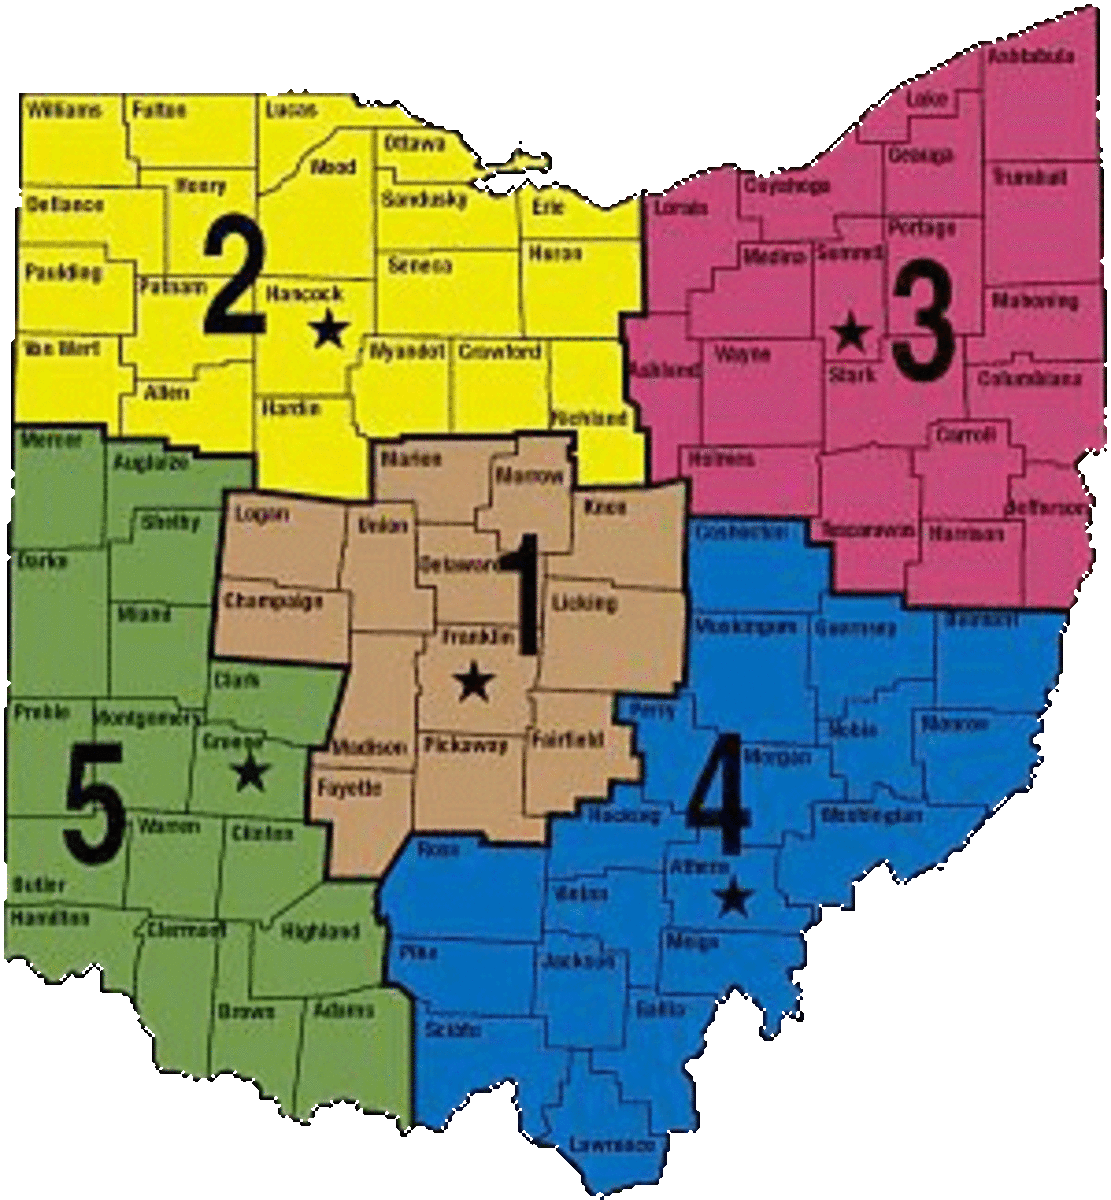 Northeast Ohio spans all the counties in pink, #3.